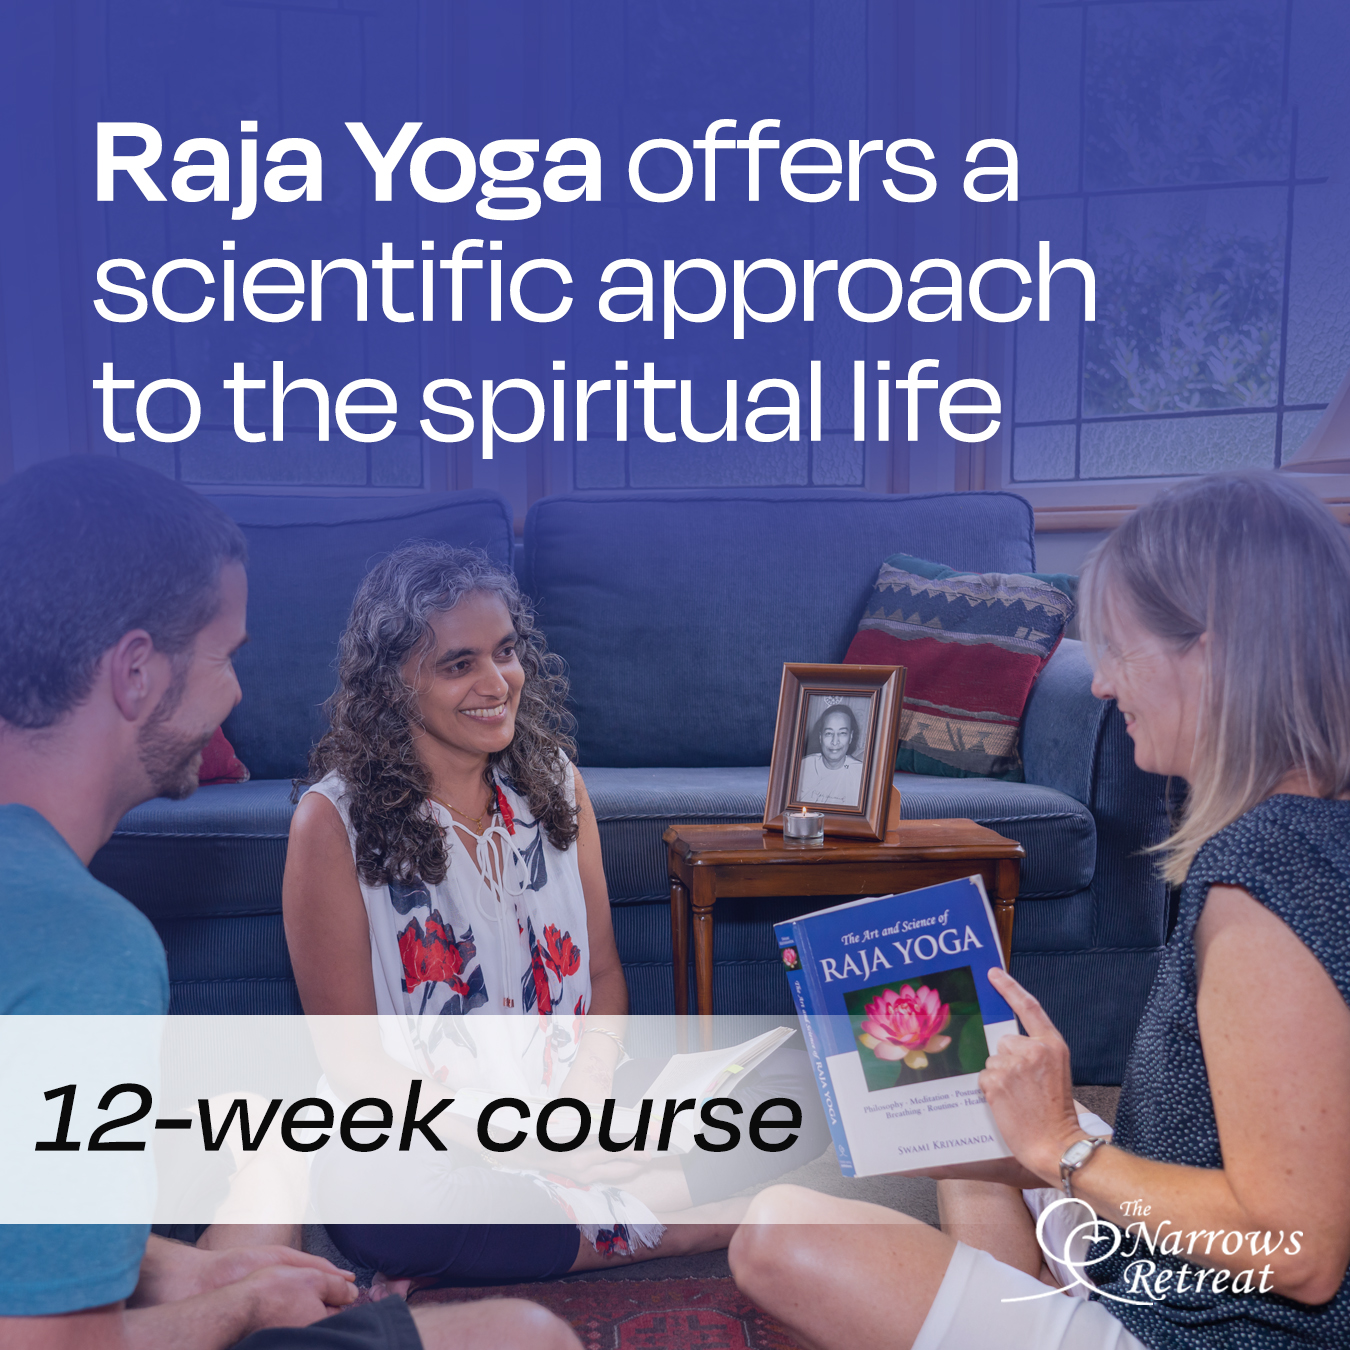 THE ART AND SCIENCE OF RAJA YOGA